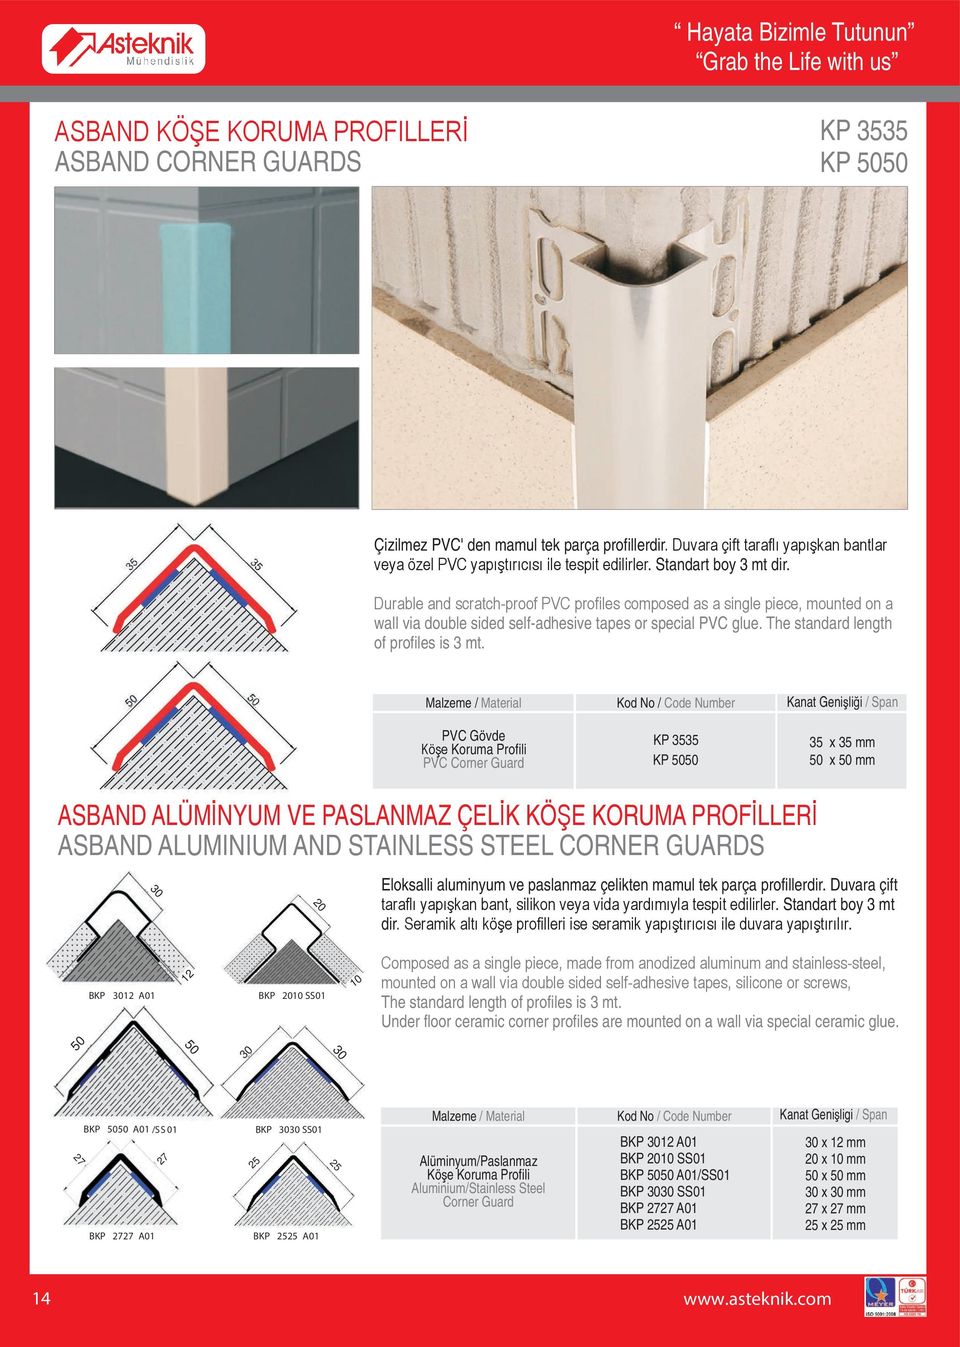 Durable and scratch-proof PVC profiles composed as a single piece, mounted on a wall via double sided self-adhesive tapes or special PVC glue. The standard length of profiles is 3 mt.